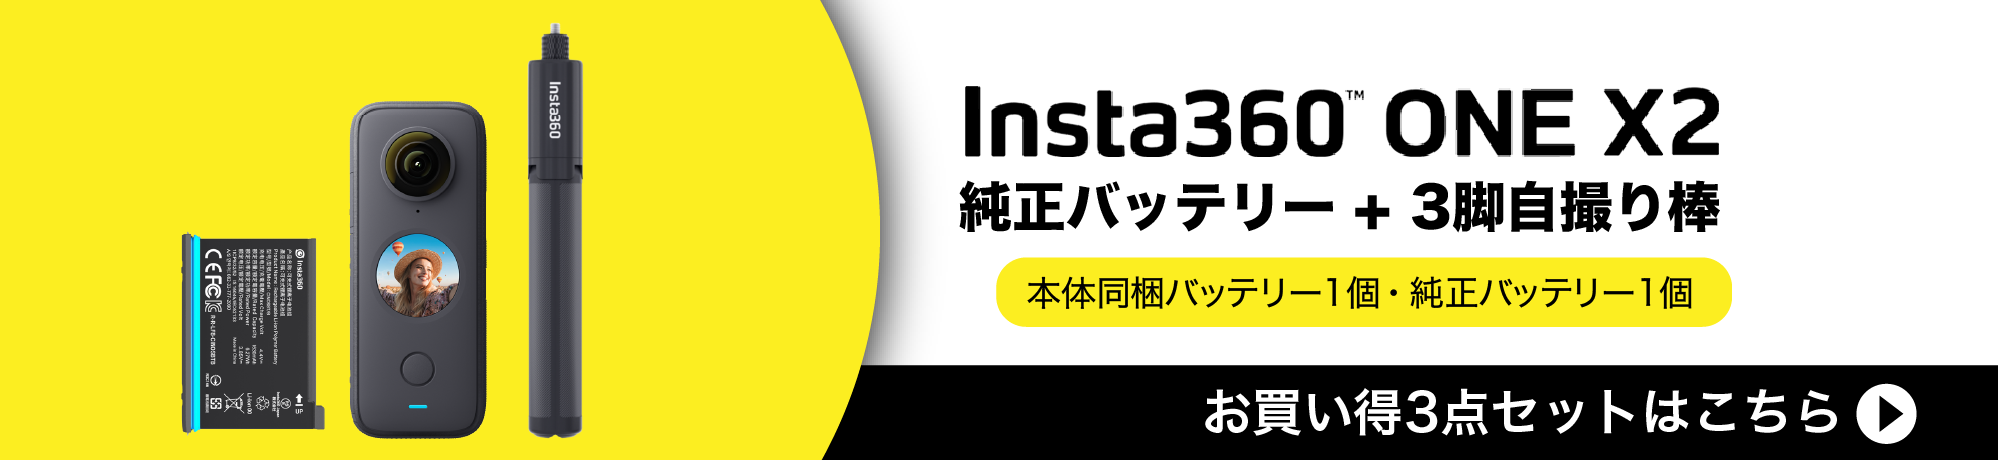 insta360 ONE X2バッテリー